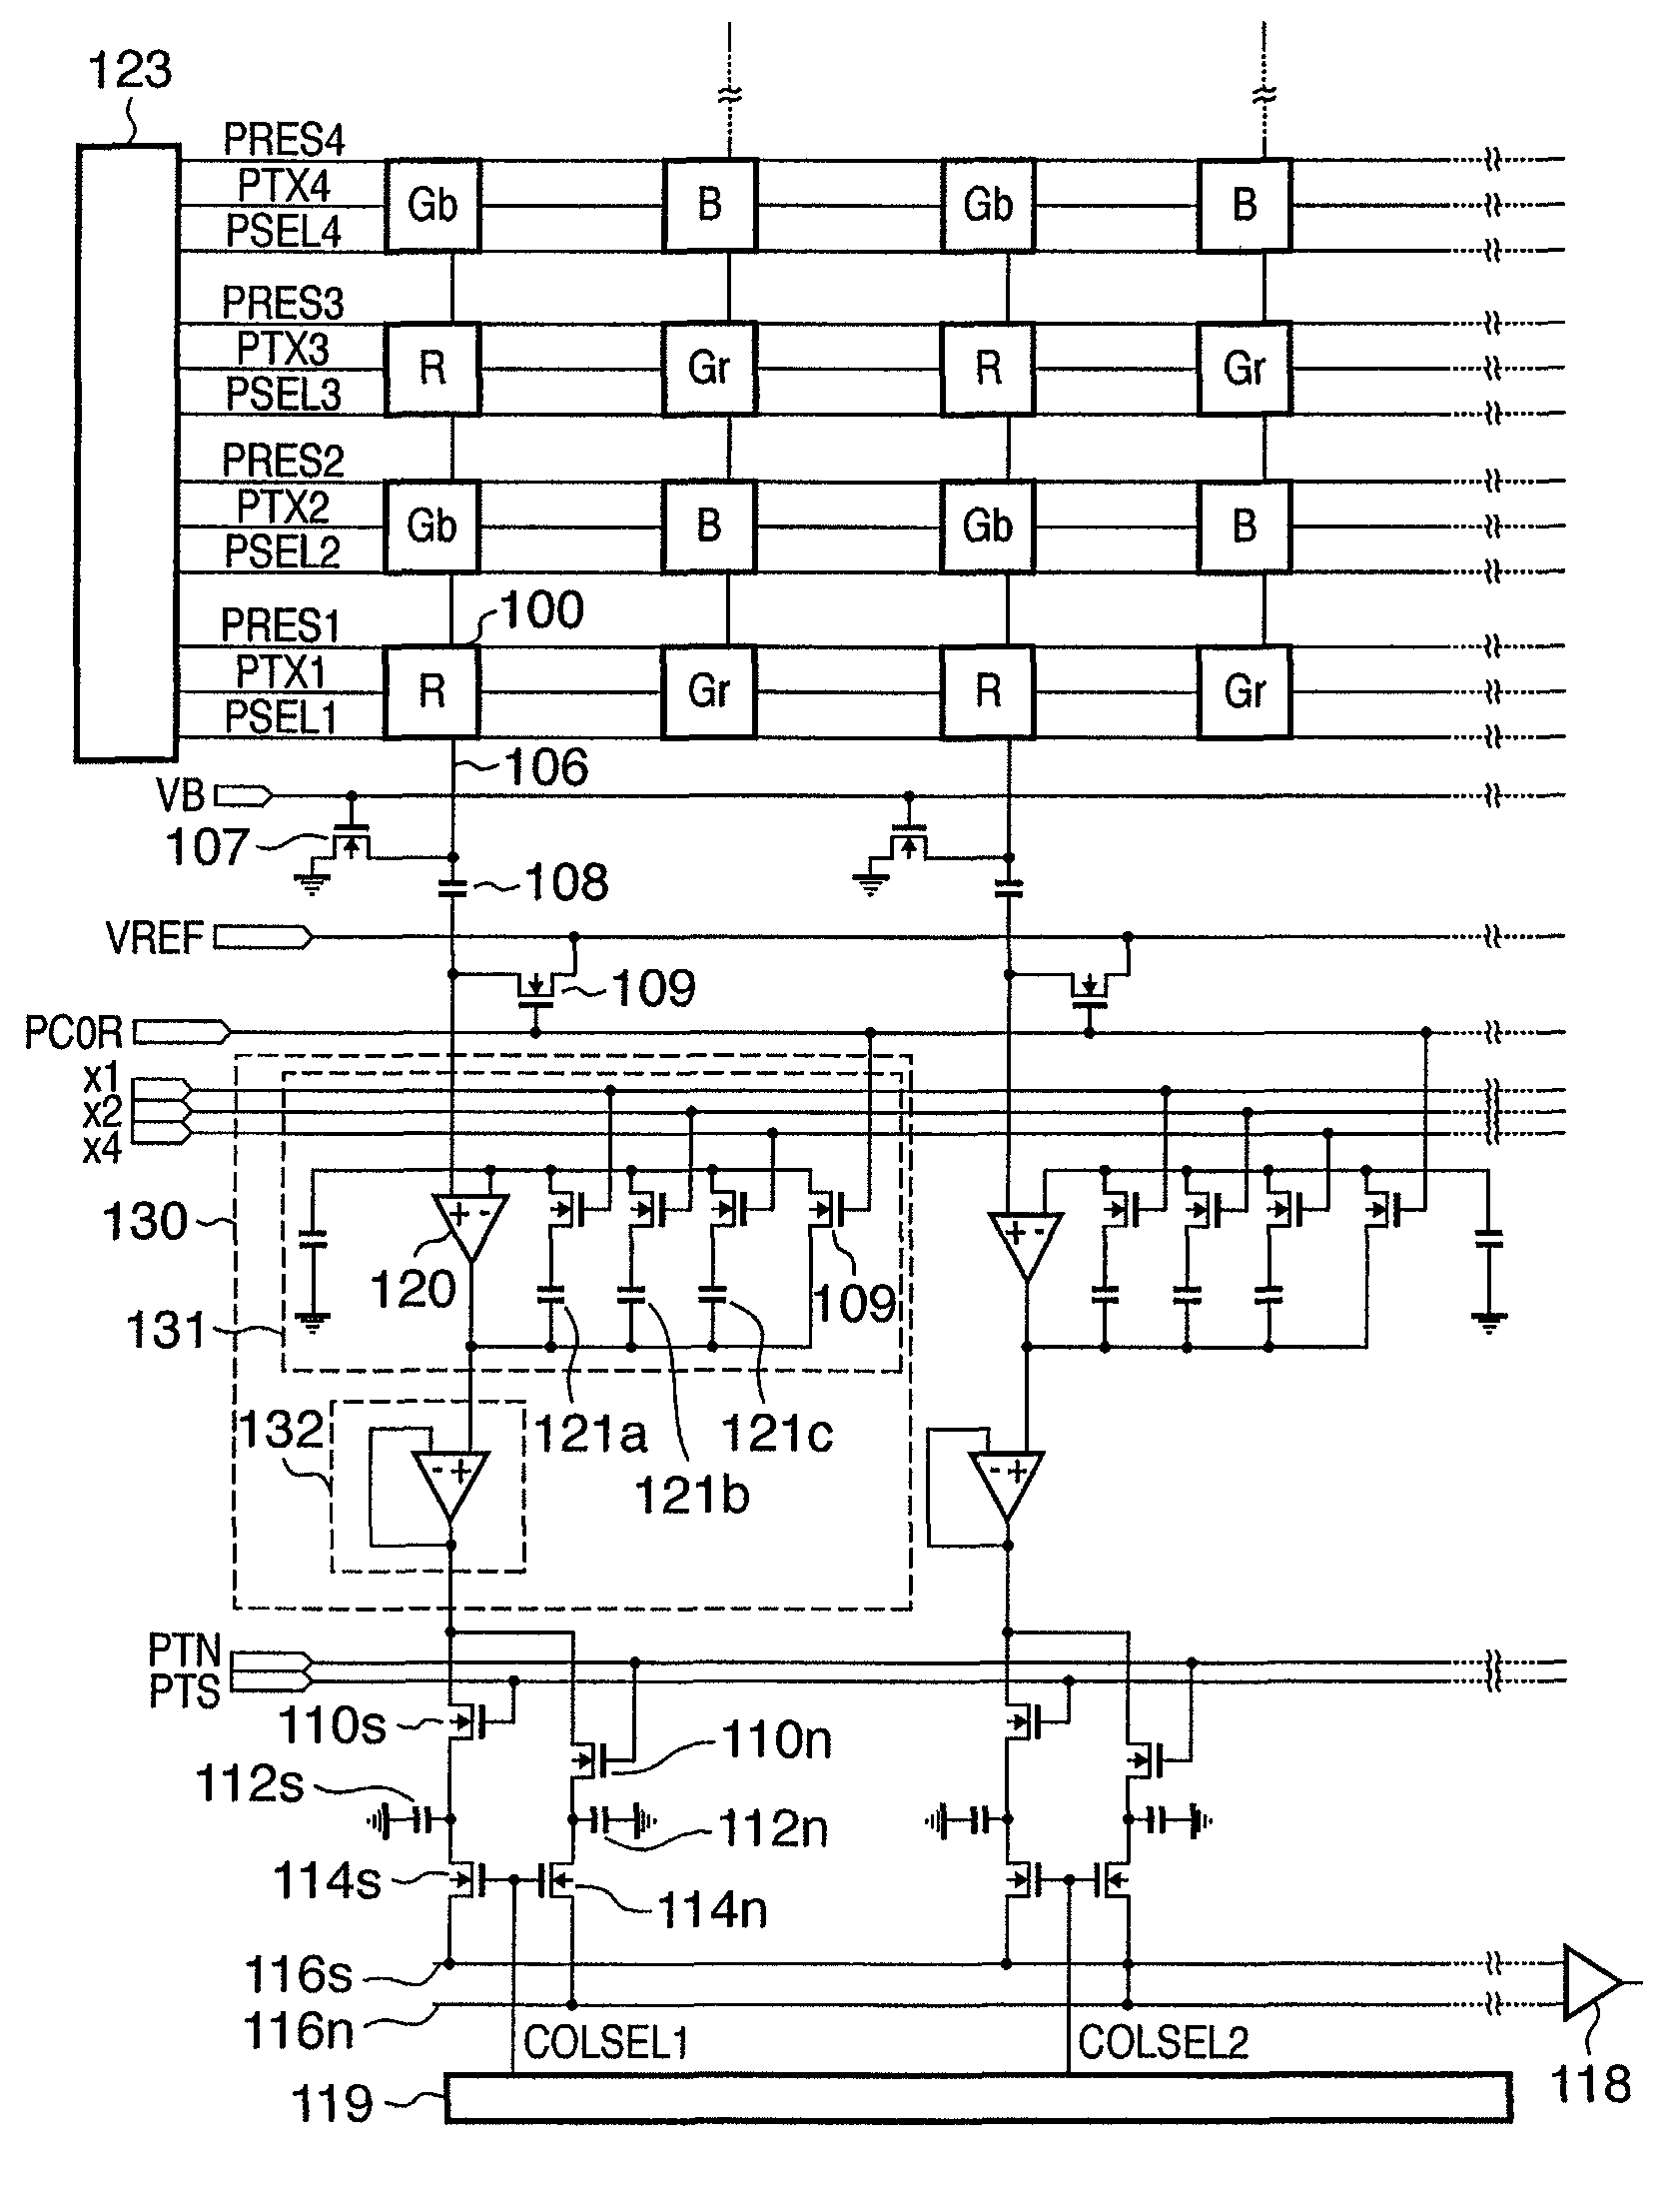 Photoelectric conversion device and image capturing device with variable amplifier for amplifying signal by a selected gain